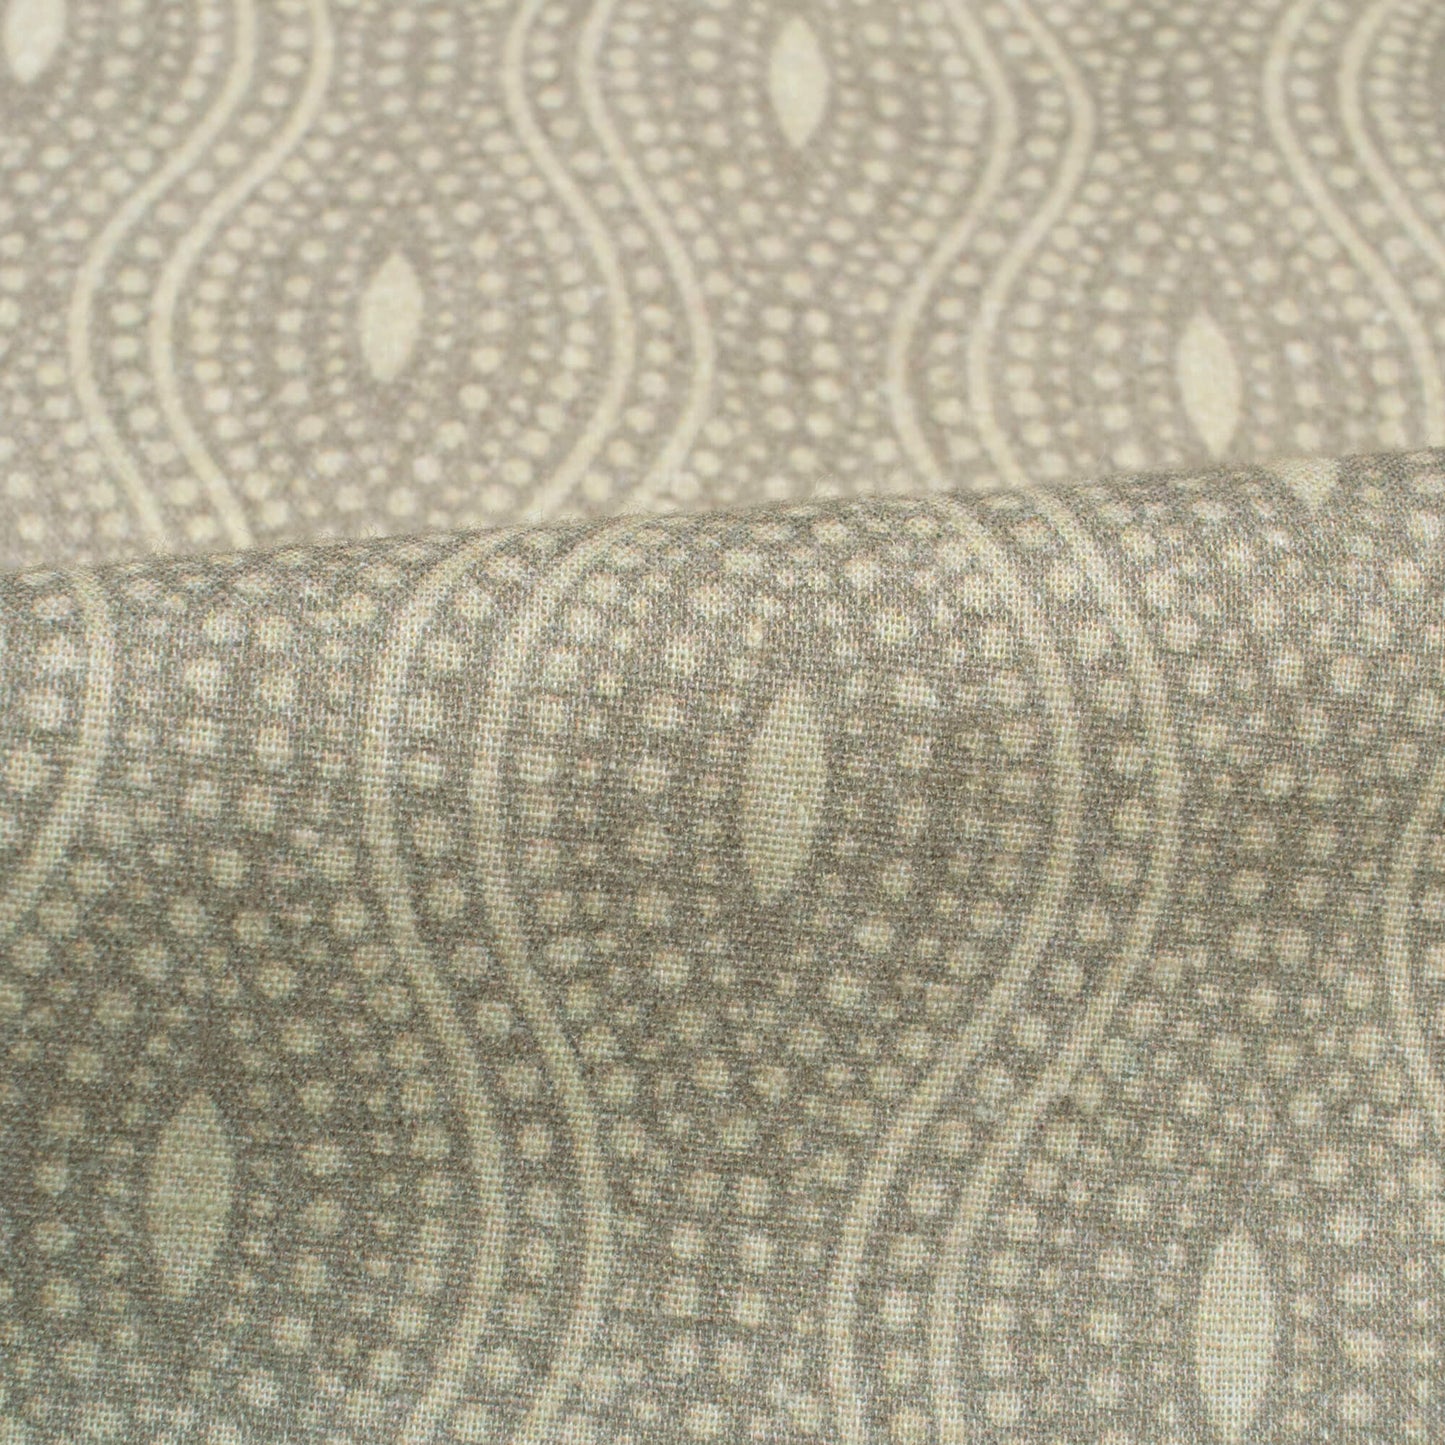 Brown And Beige Geometric Digital Print Cotton Cambric Fabric